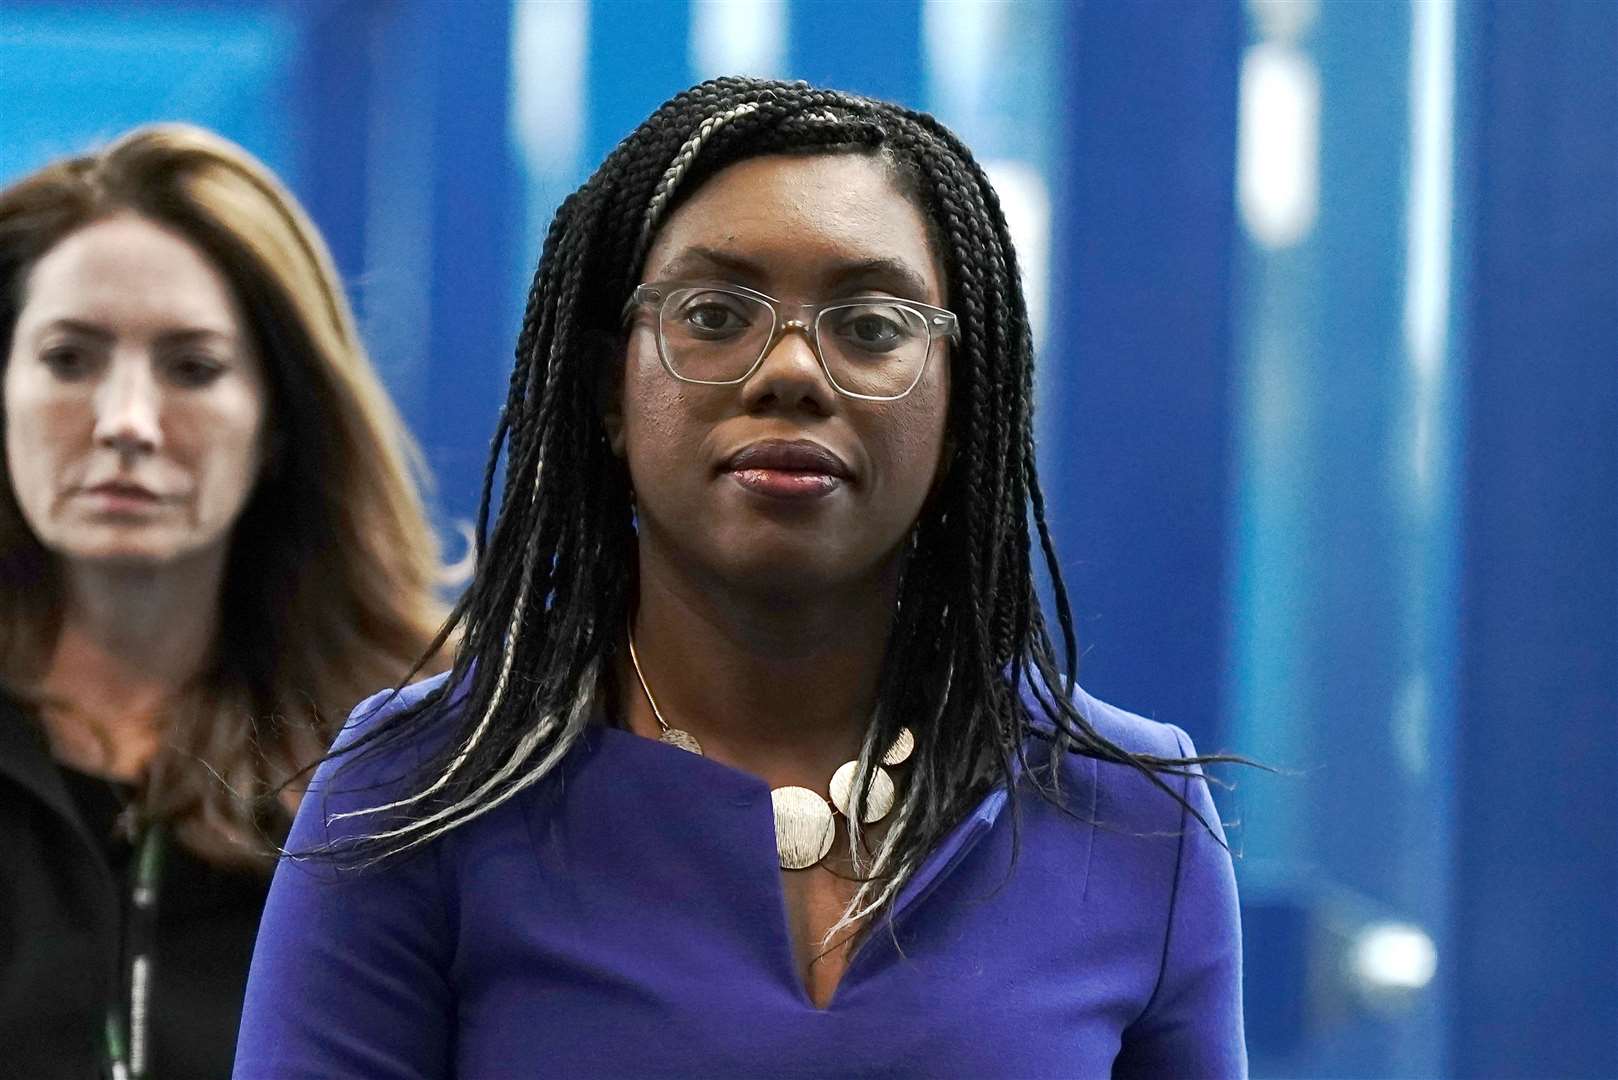 International Trade Secretary Kemi Badenoch said the deal ‘will protect livelihoods and families now and in Ukraine’s post-war future’ (Aaron Chown/PA)